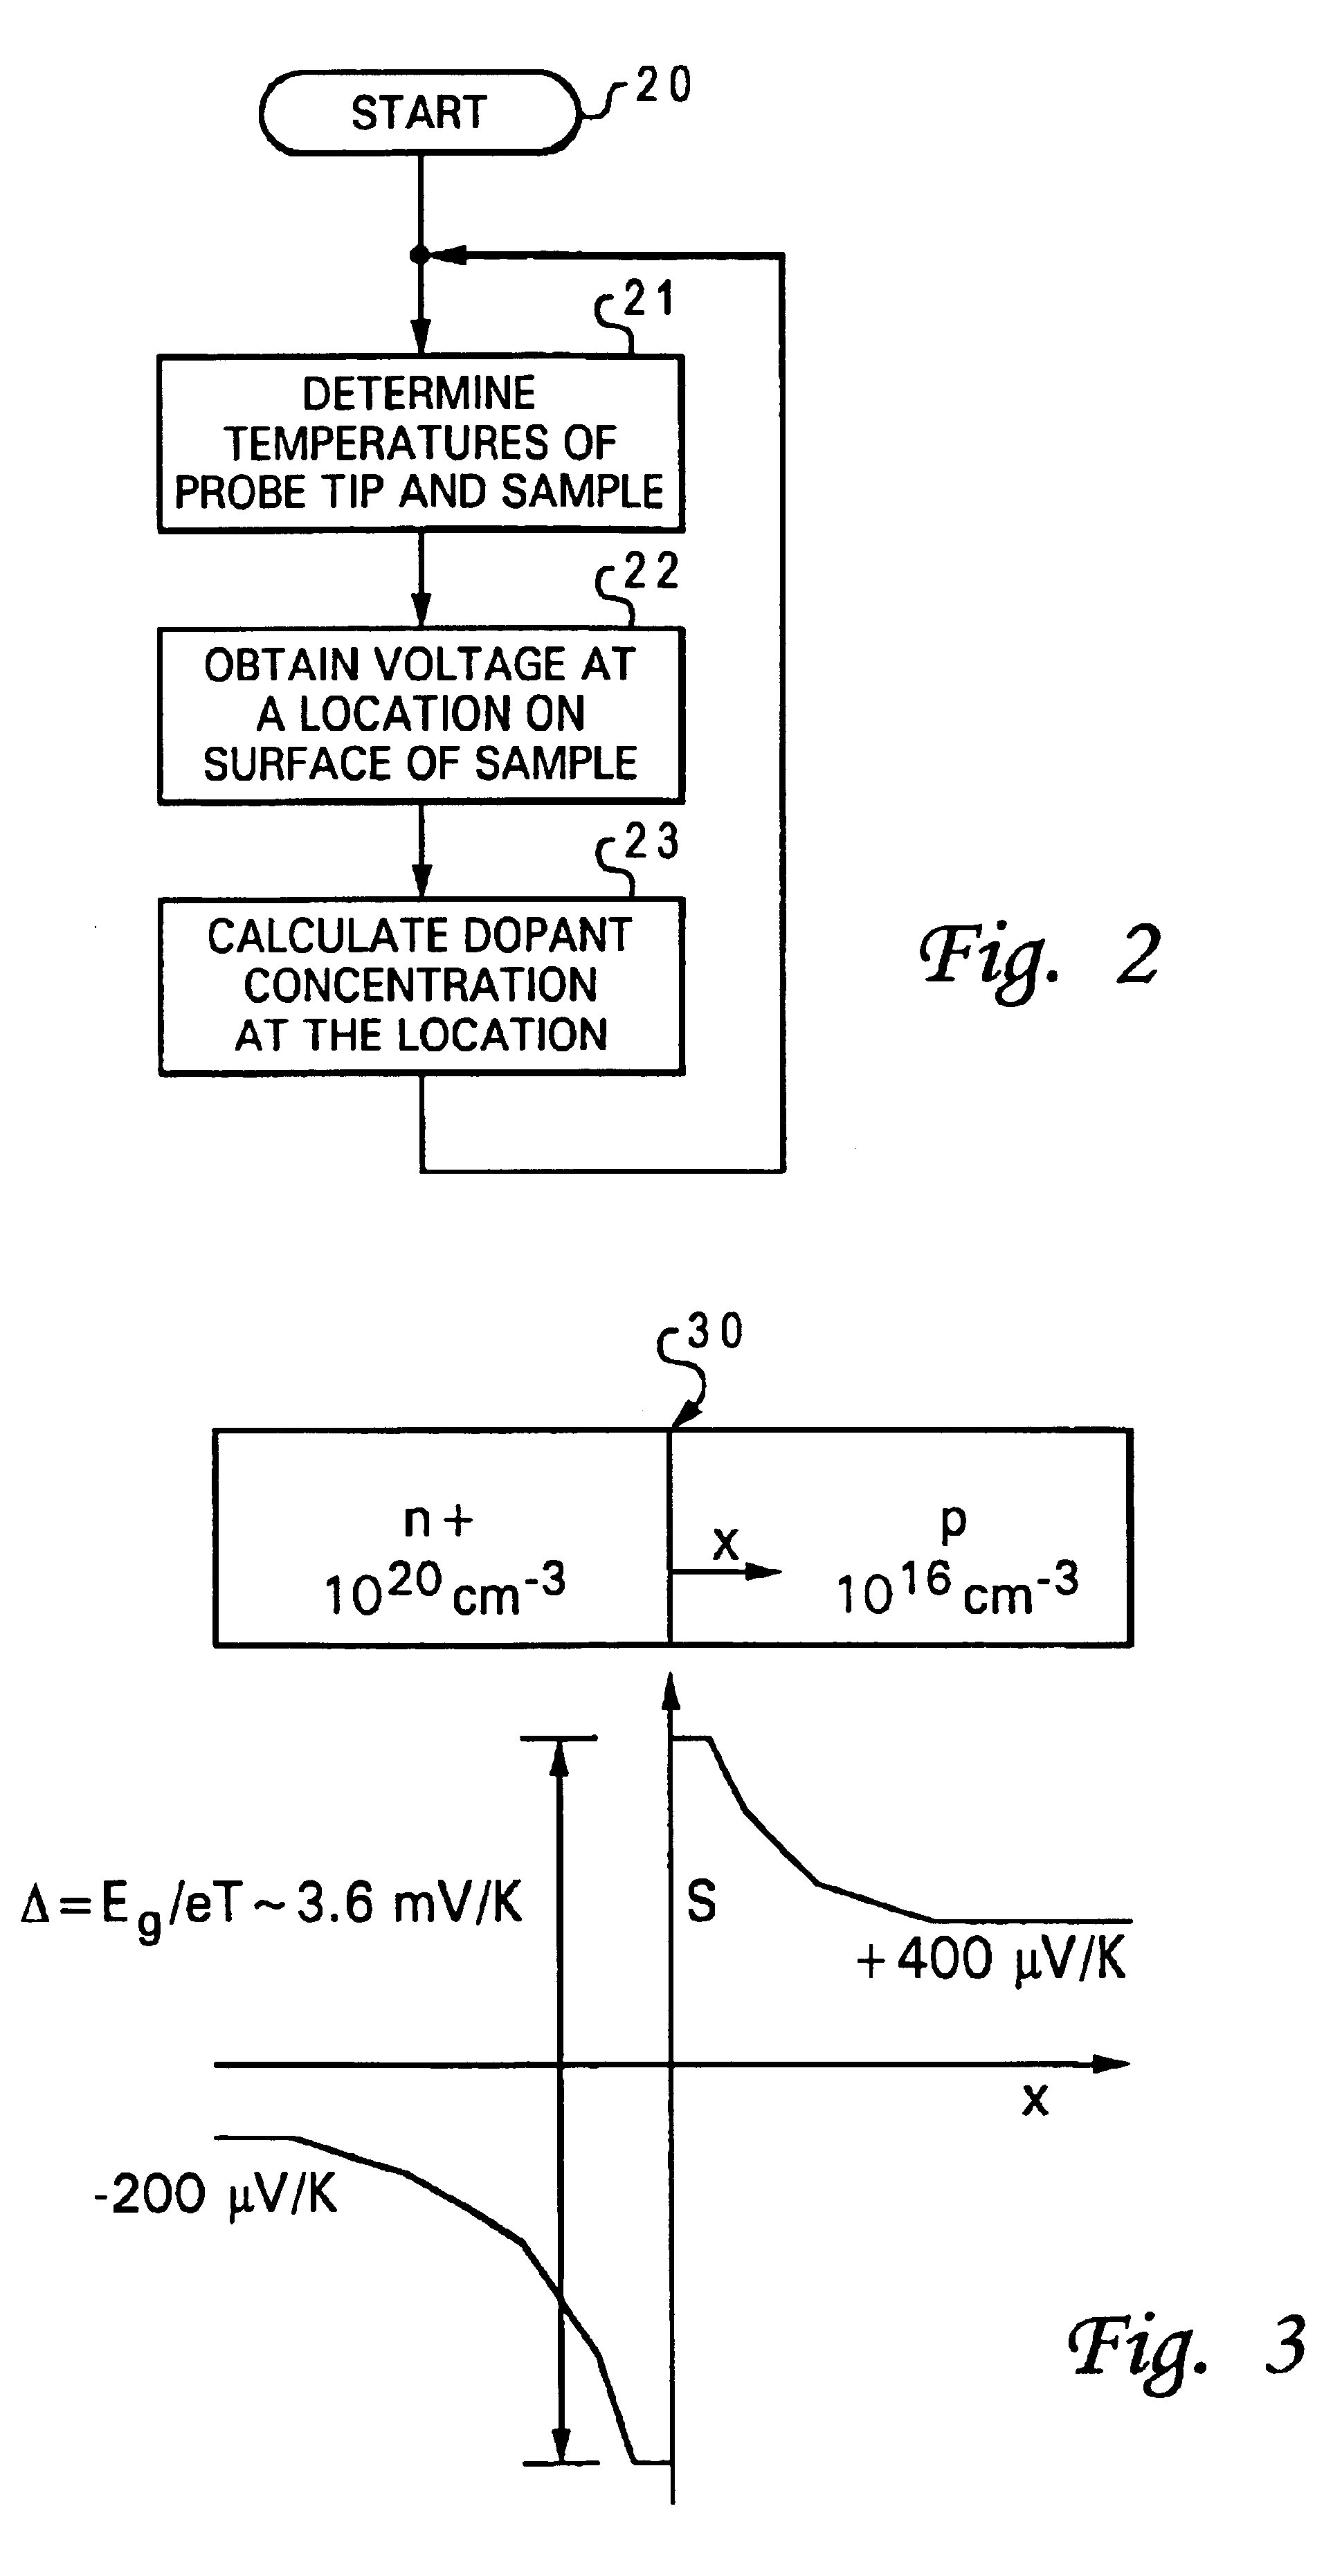 Method and apparatus for measuring dopant profile of a semiconductor